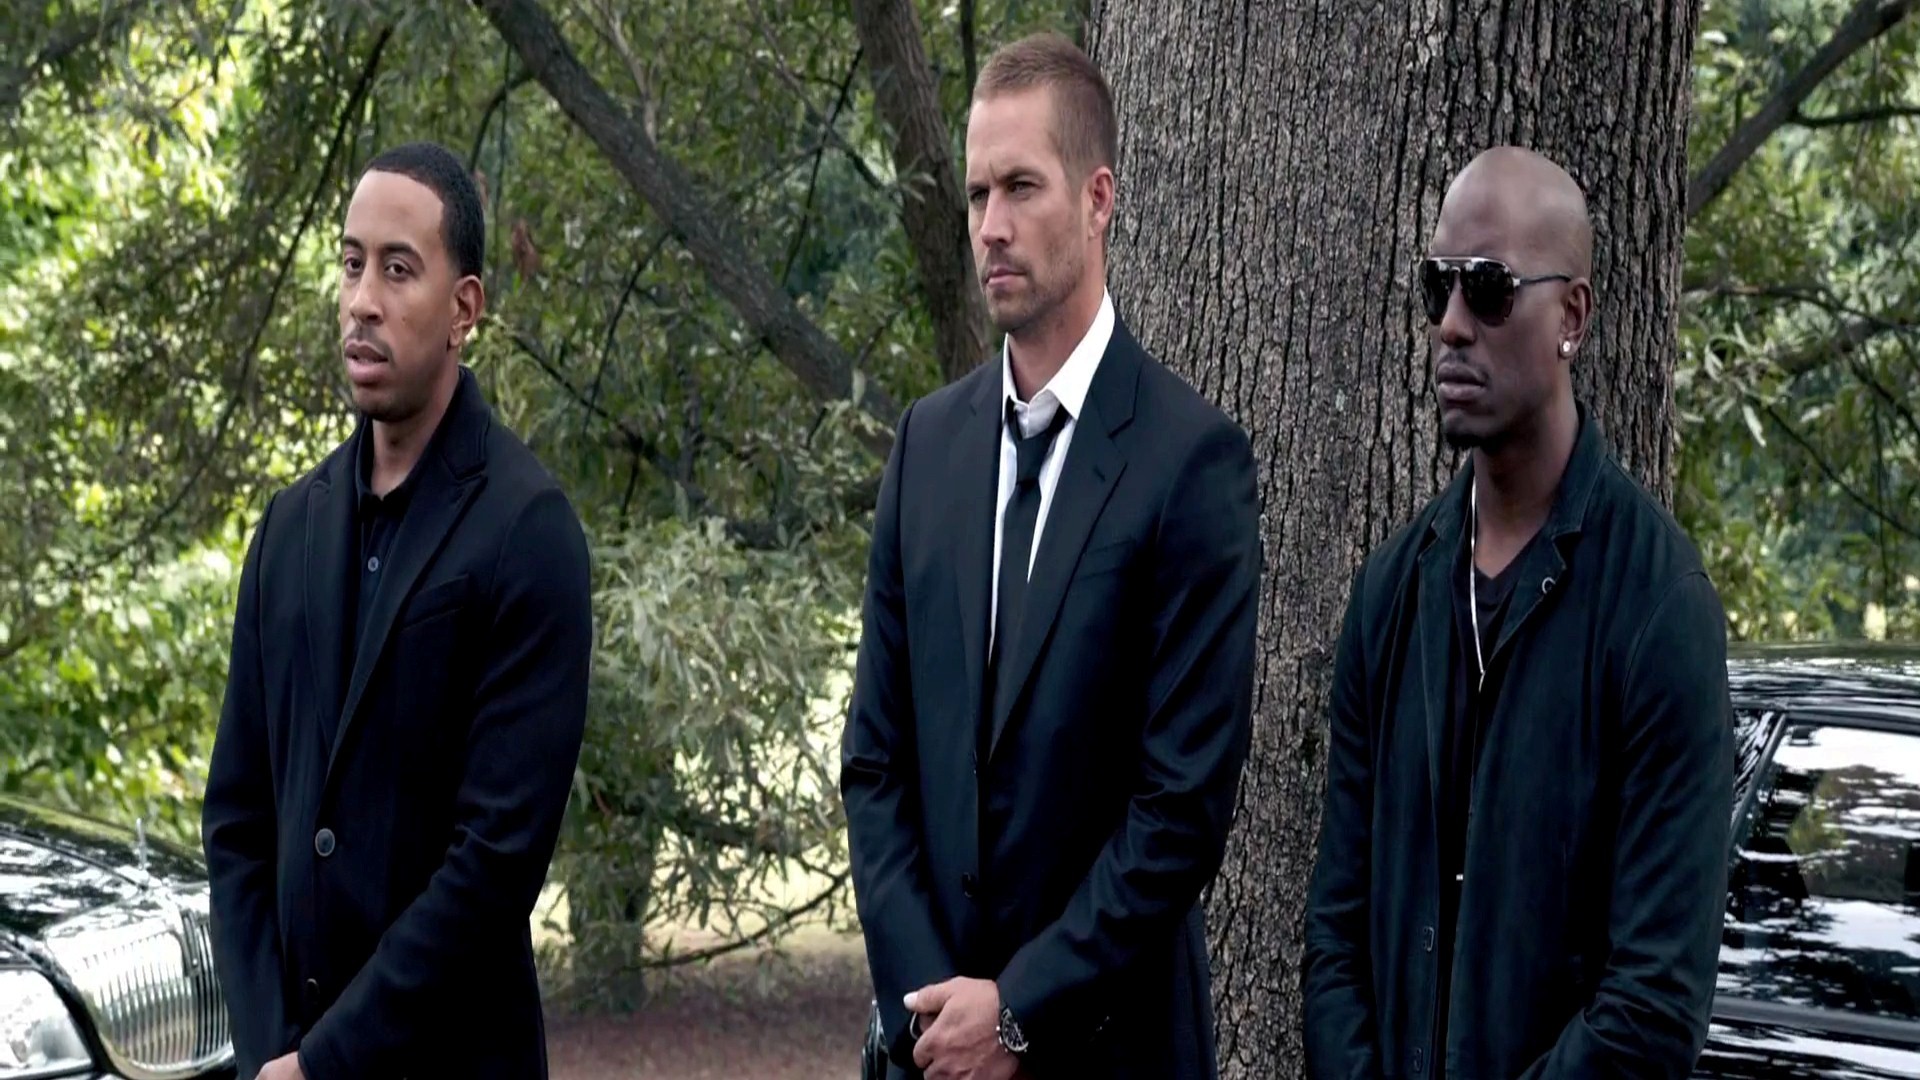 1920x1080 Paul Walker Tyrese Gibson and Ludacris Star Cast of US Movie Furious 7  